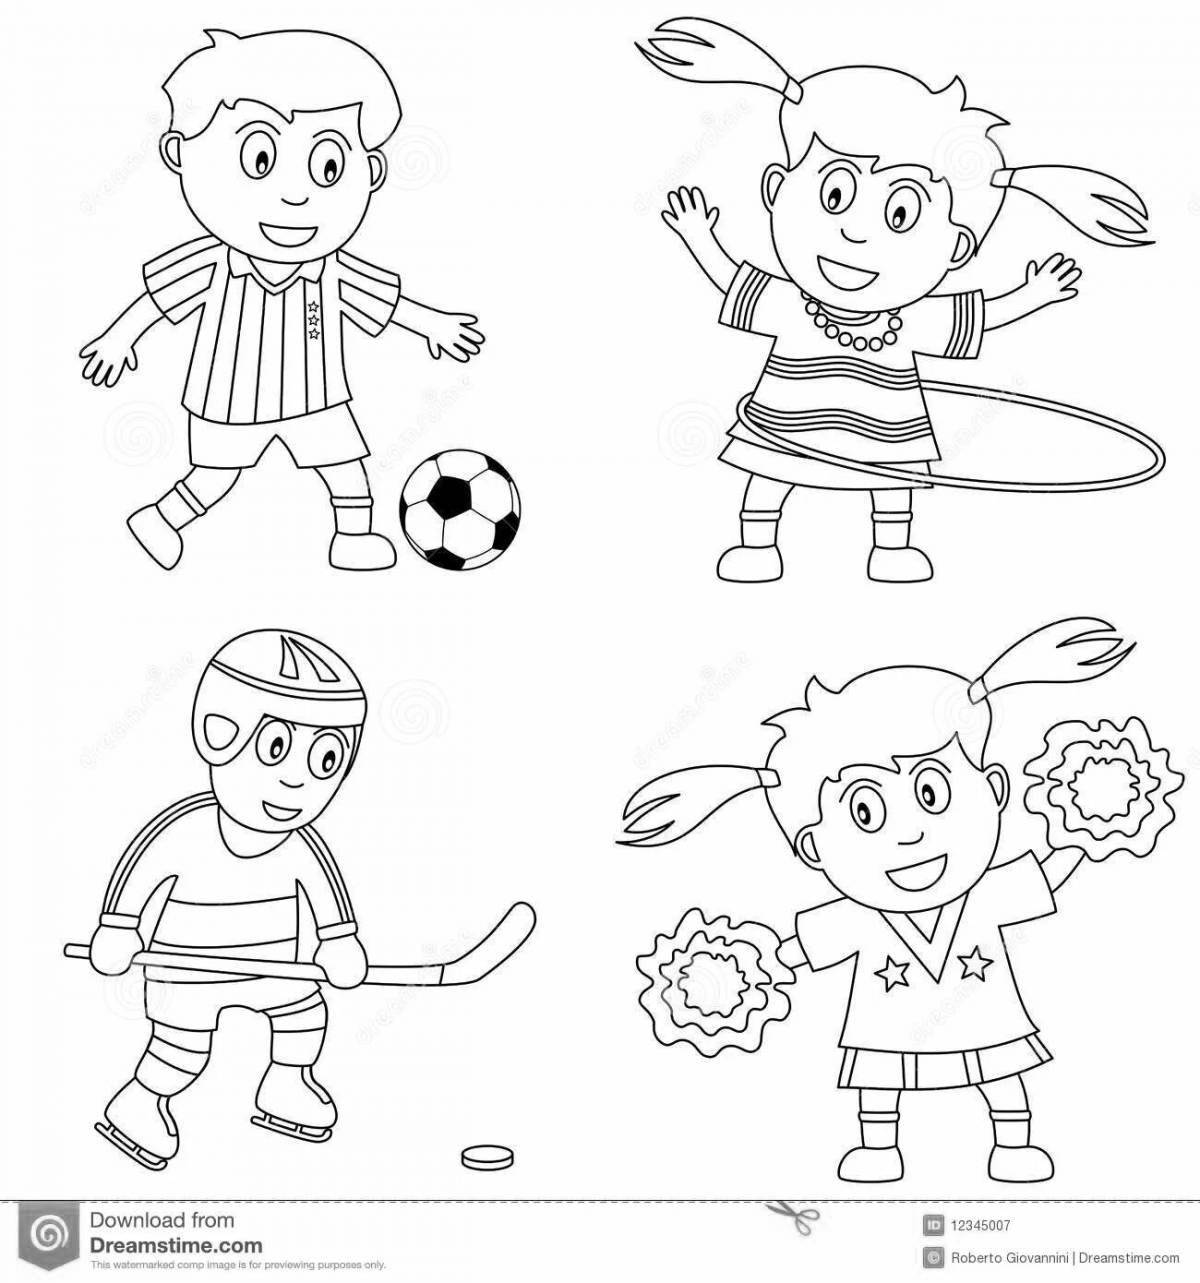 Incredible sports coloring pages for 5-6 year olds